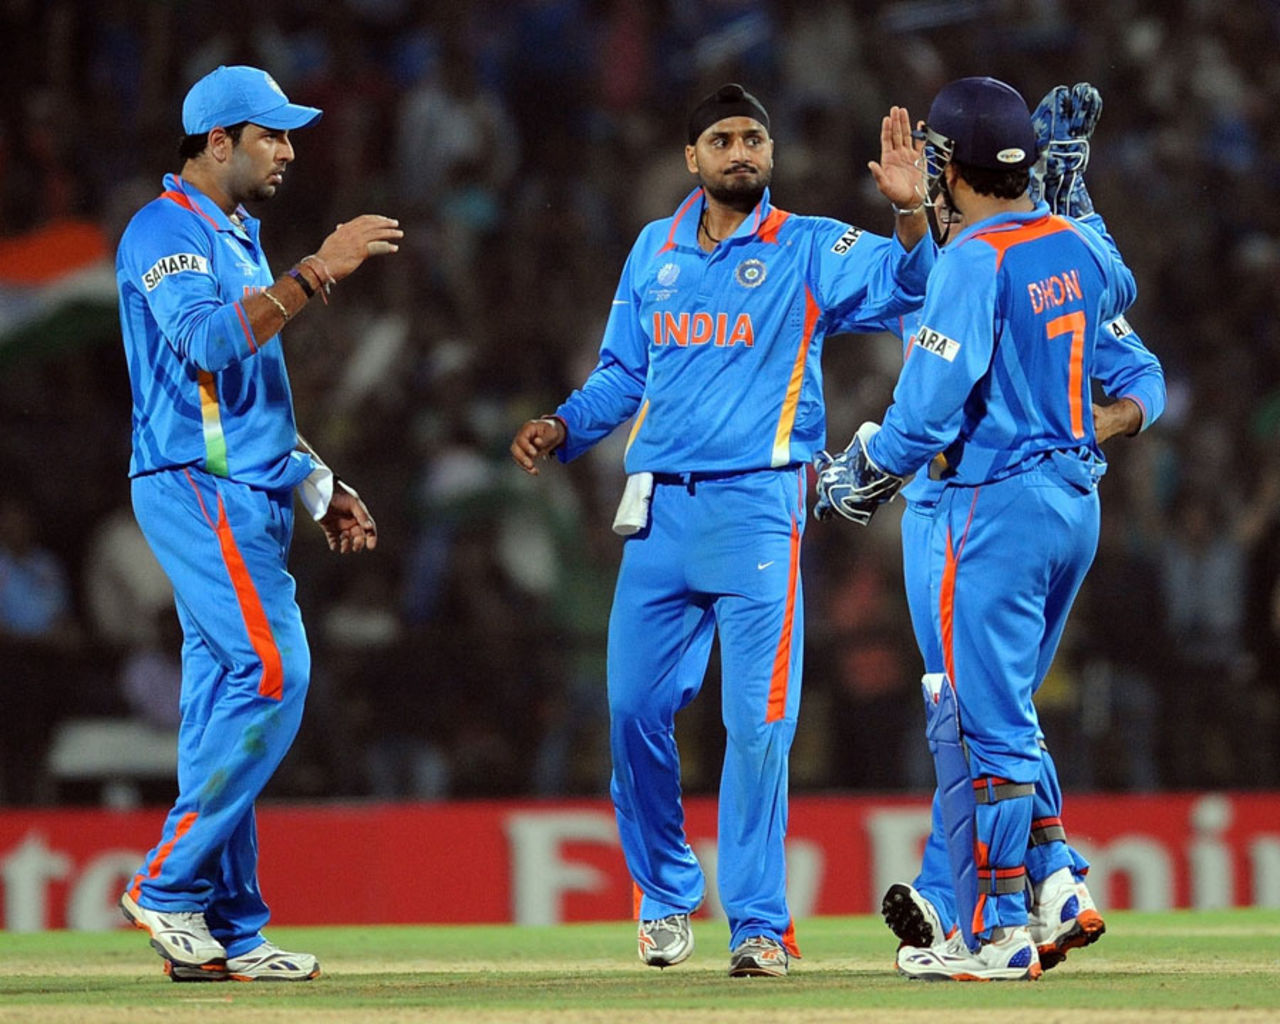 Harbhajan Singh is congratulated on dismissing Hashim Amla, India v South Africa, Group B, World Cup, Nagpur, March 12, 2011